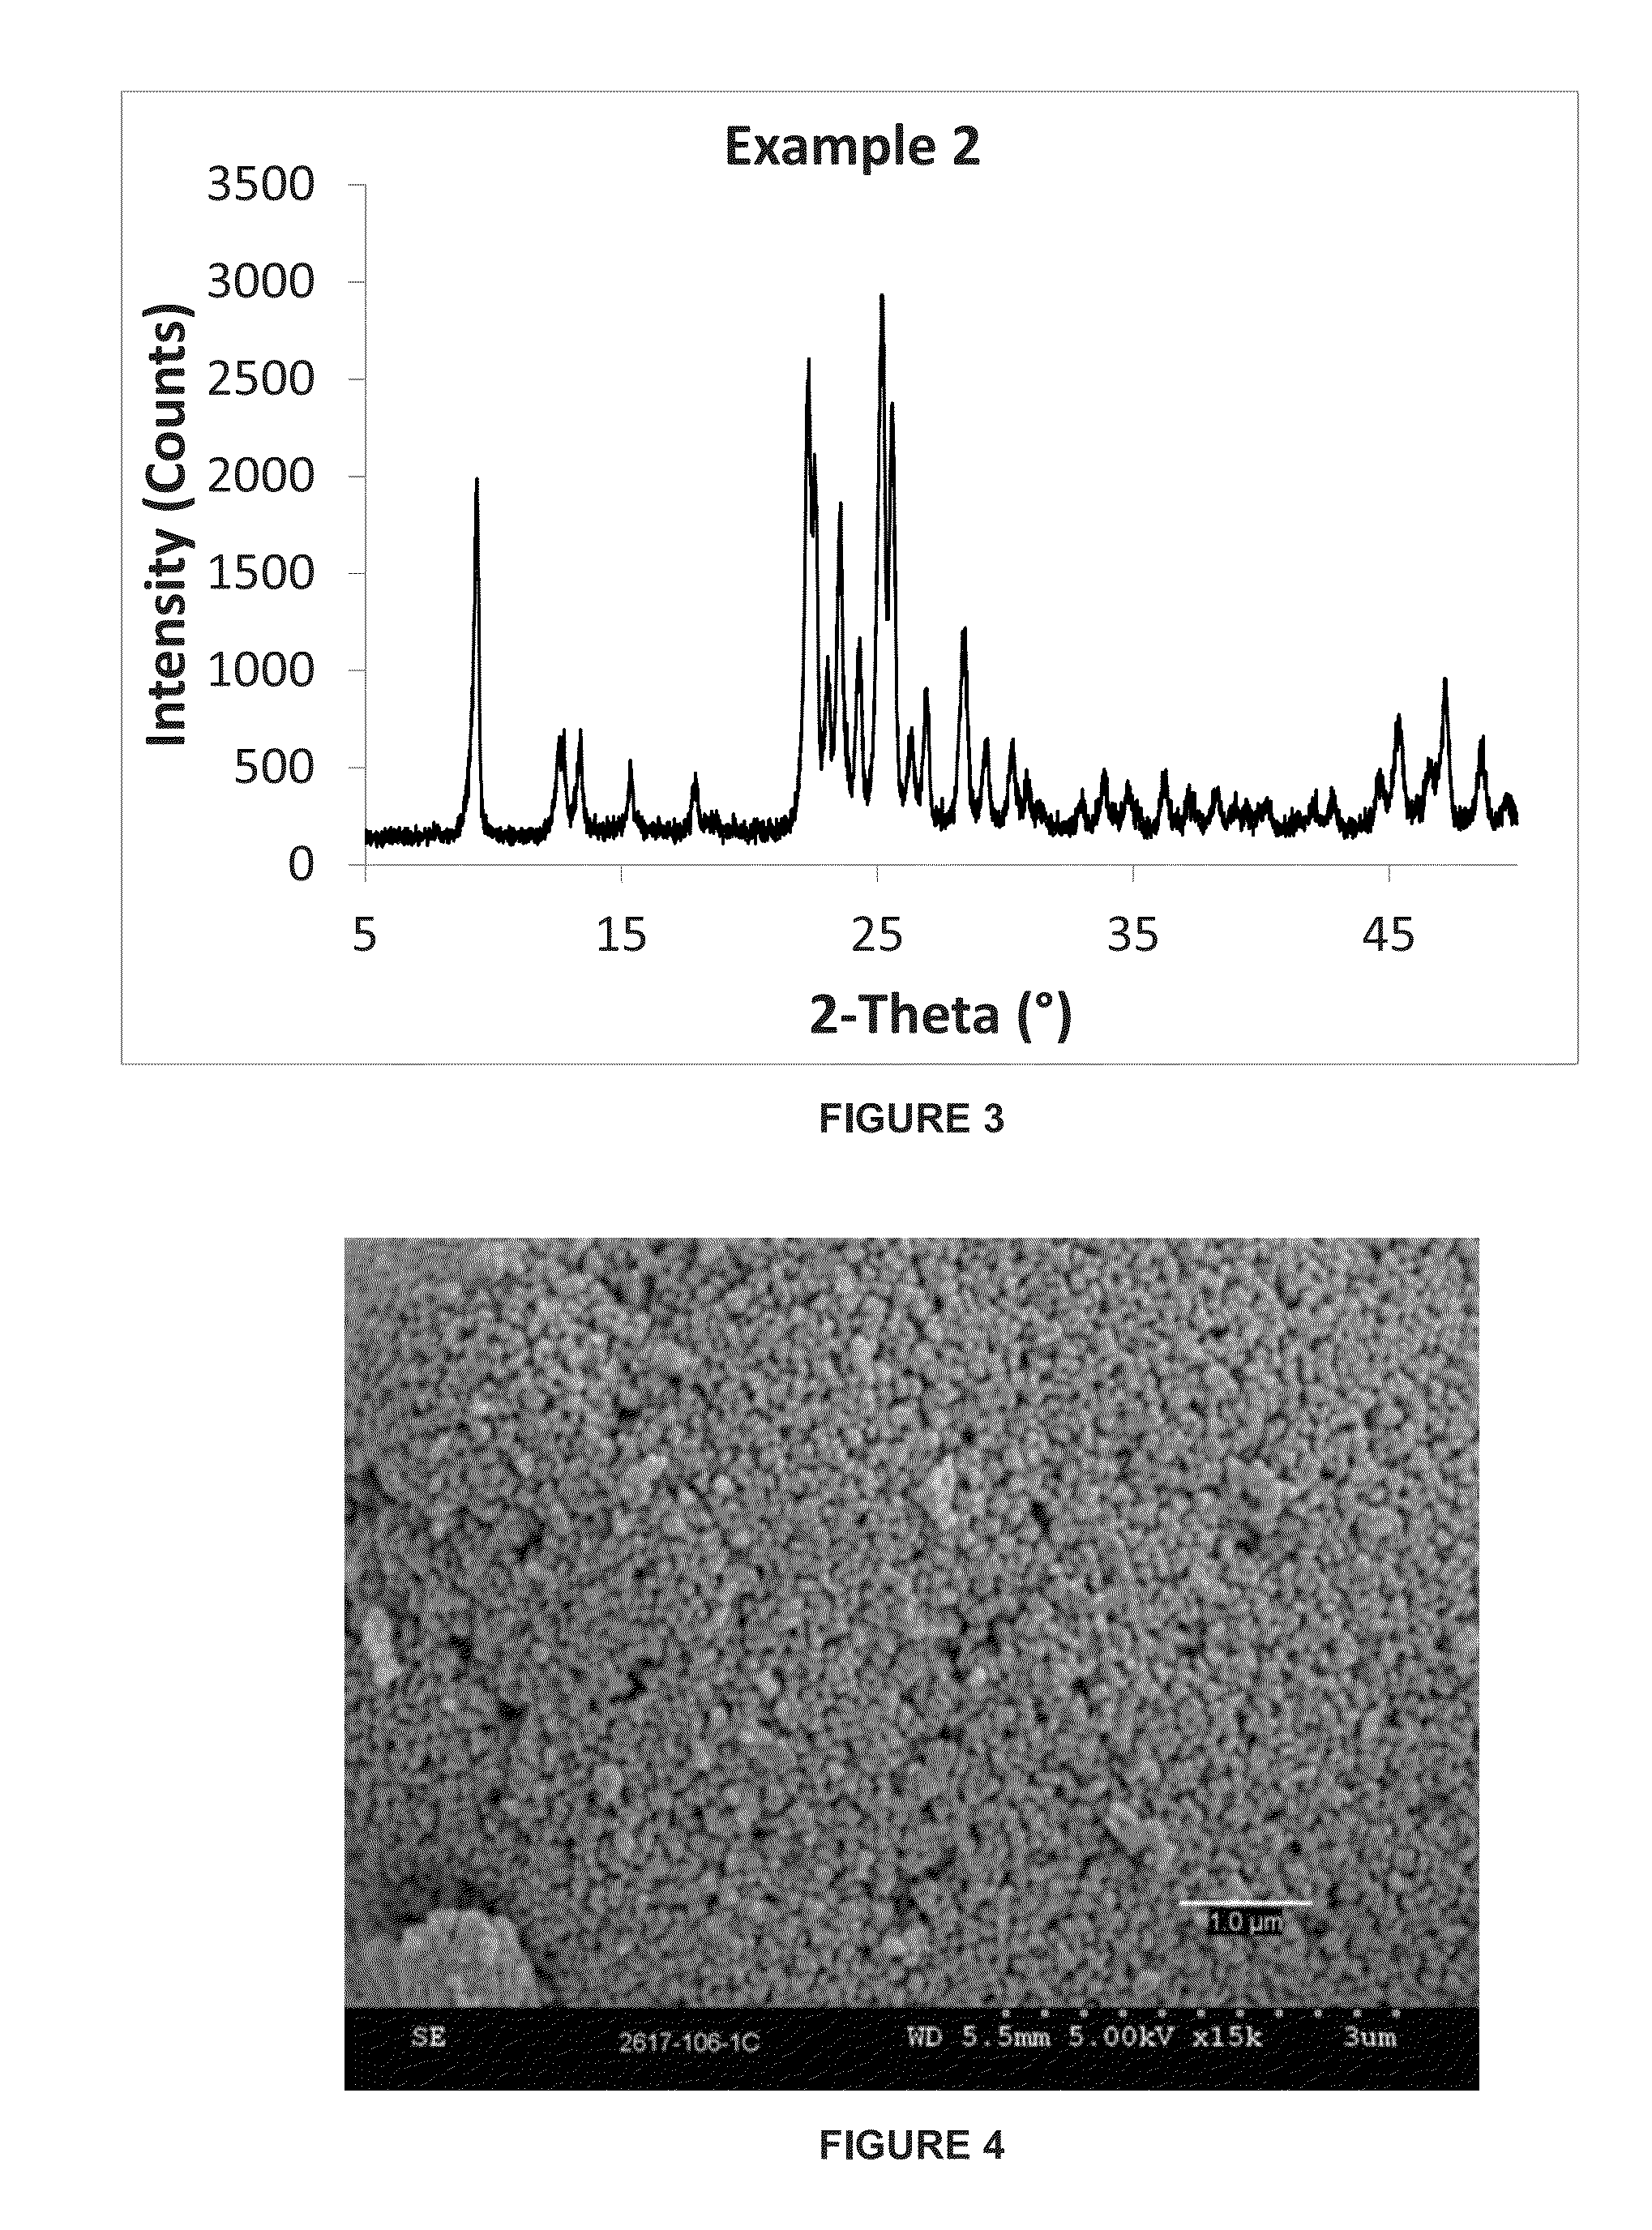 Small crystal ferrierite and method of making the same